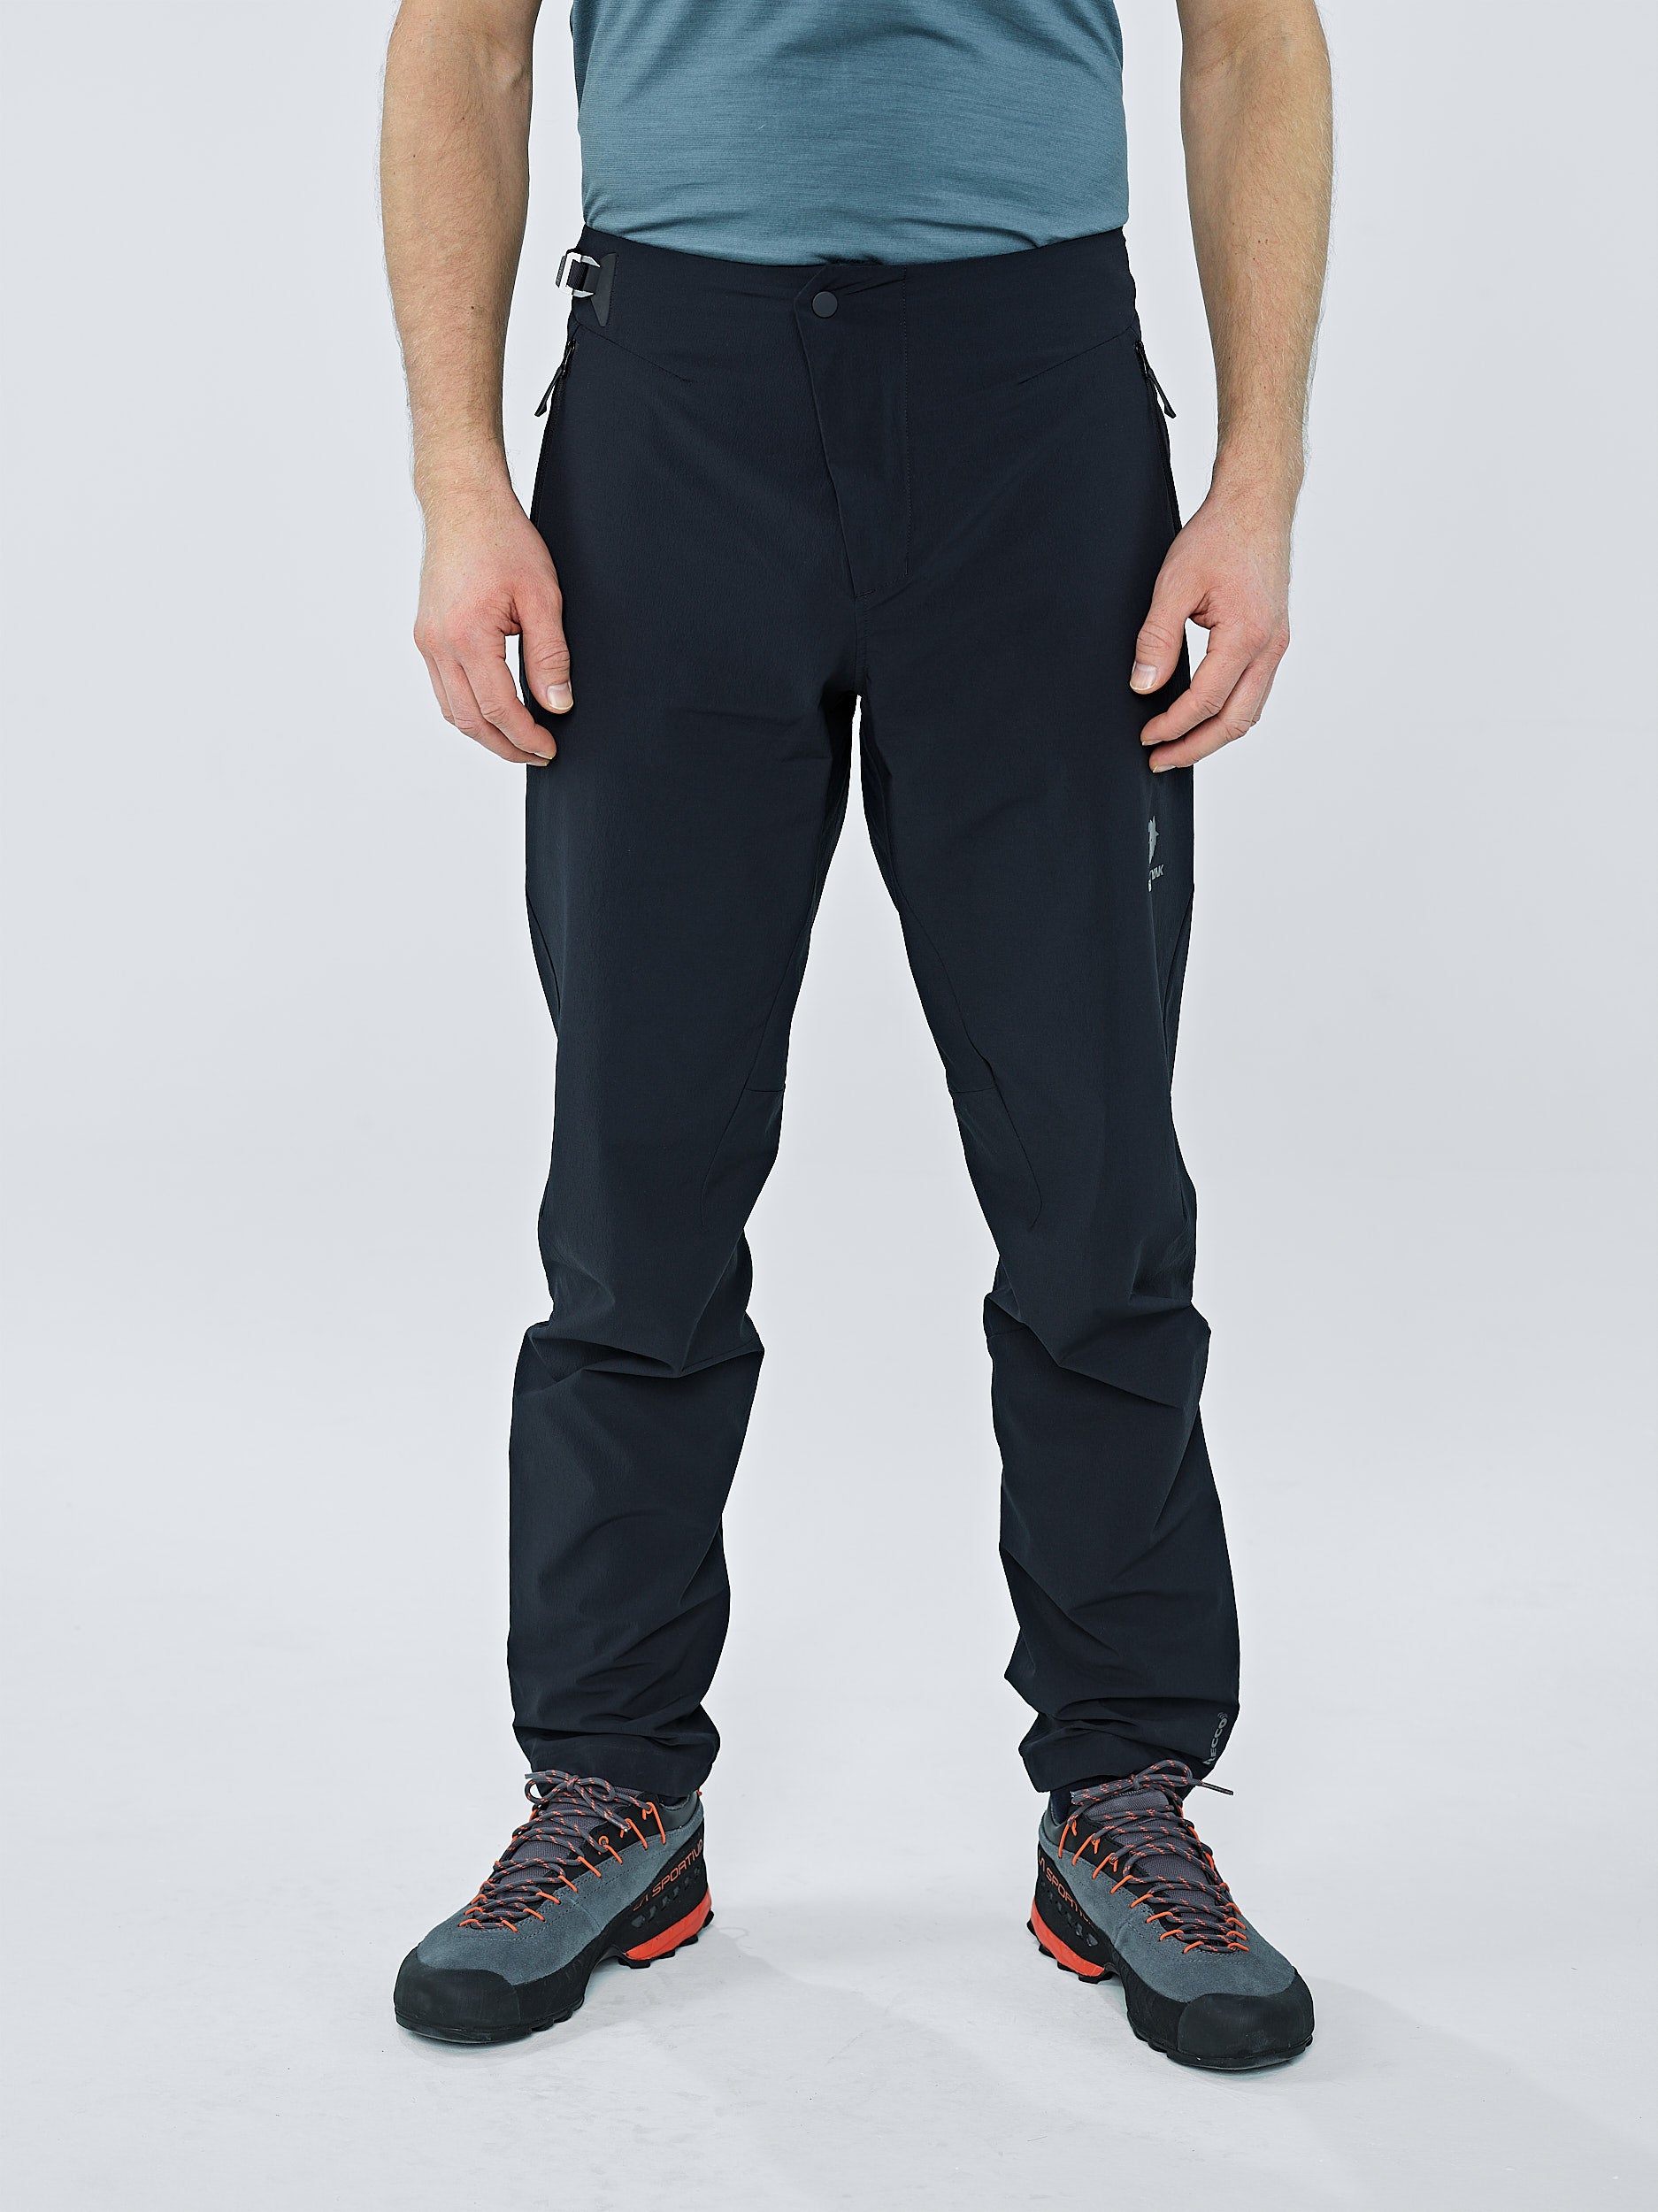 Men Outdoor Sport Hiking Trousers Thick Fleece Lined Climbing Skiing Shell  Pants | eBay